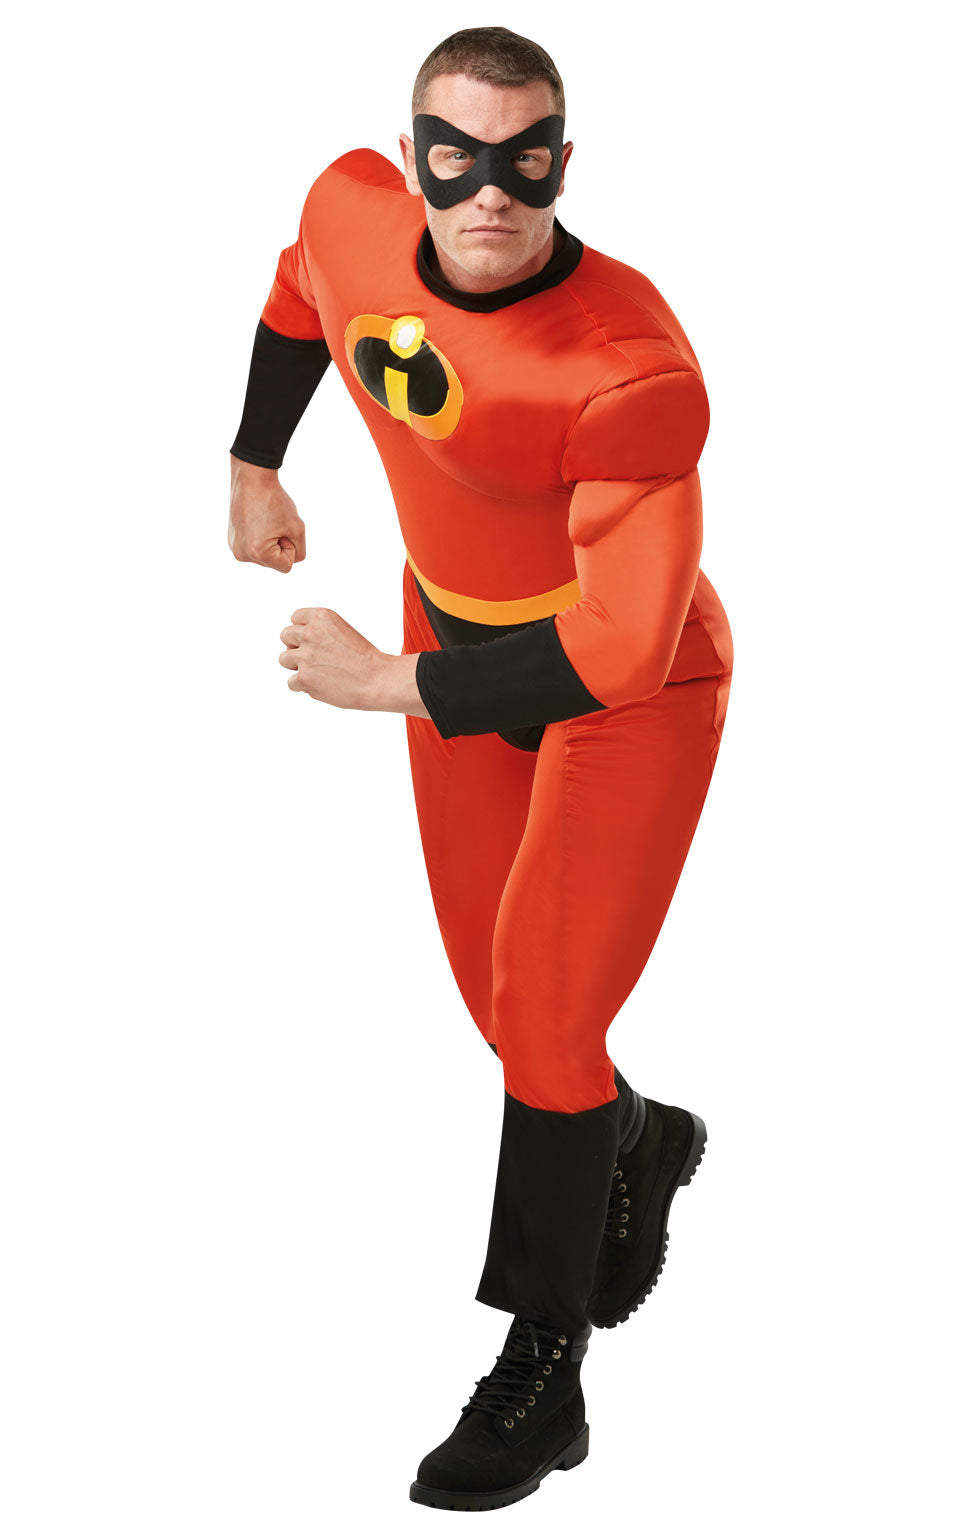 MR INCREDIBLE 2 DELUXE COSTUME - SIZE STD